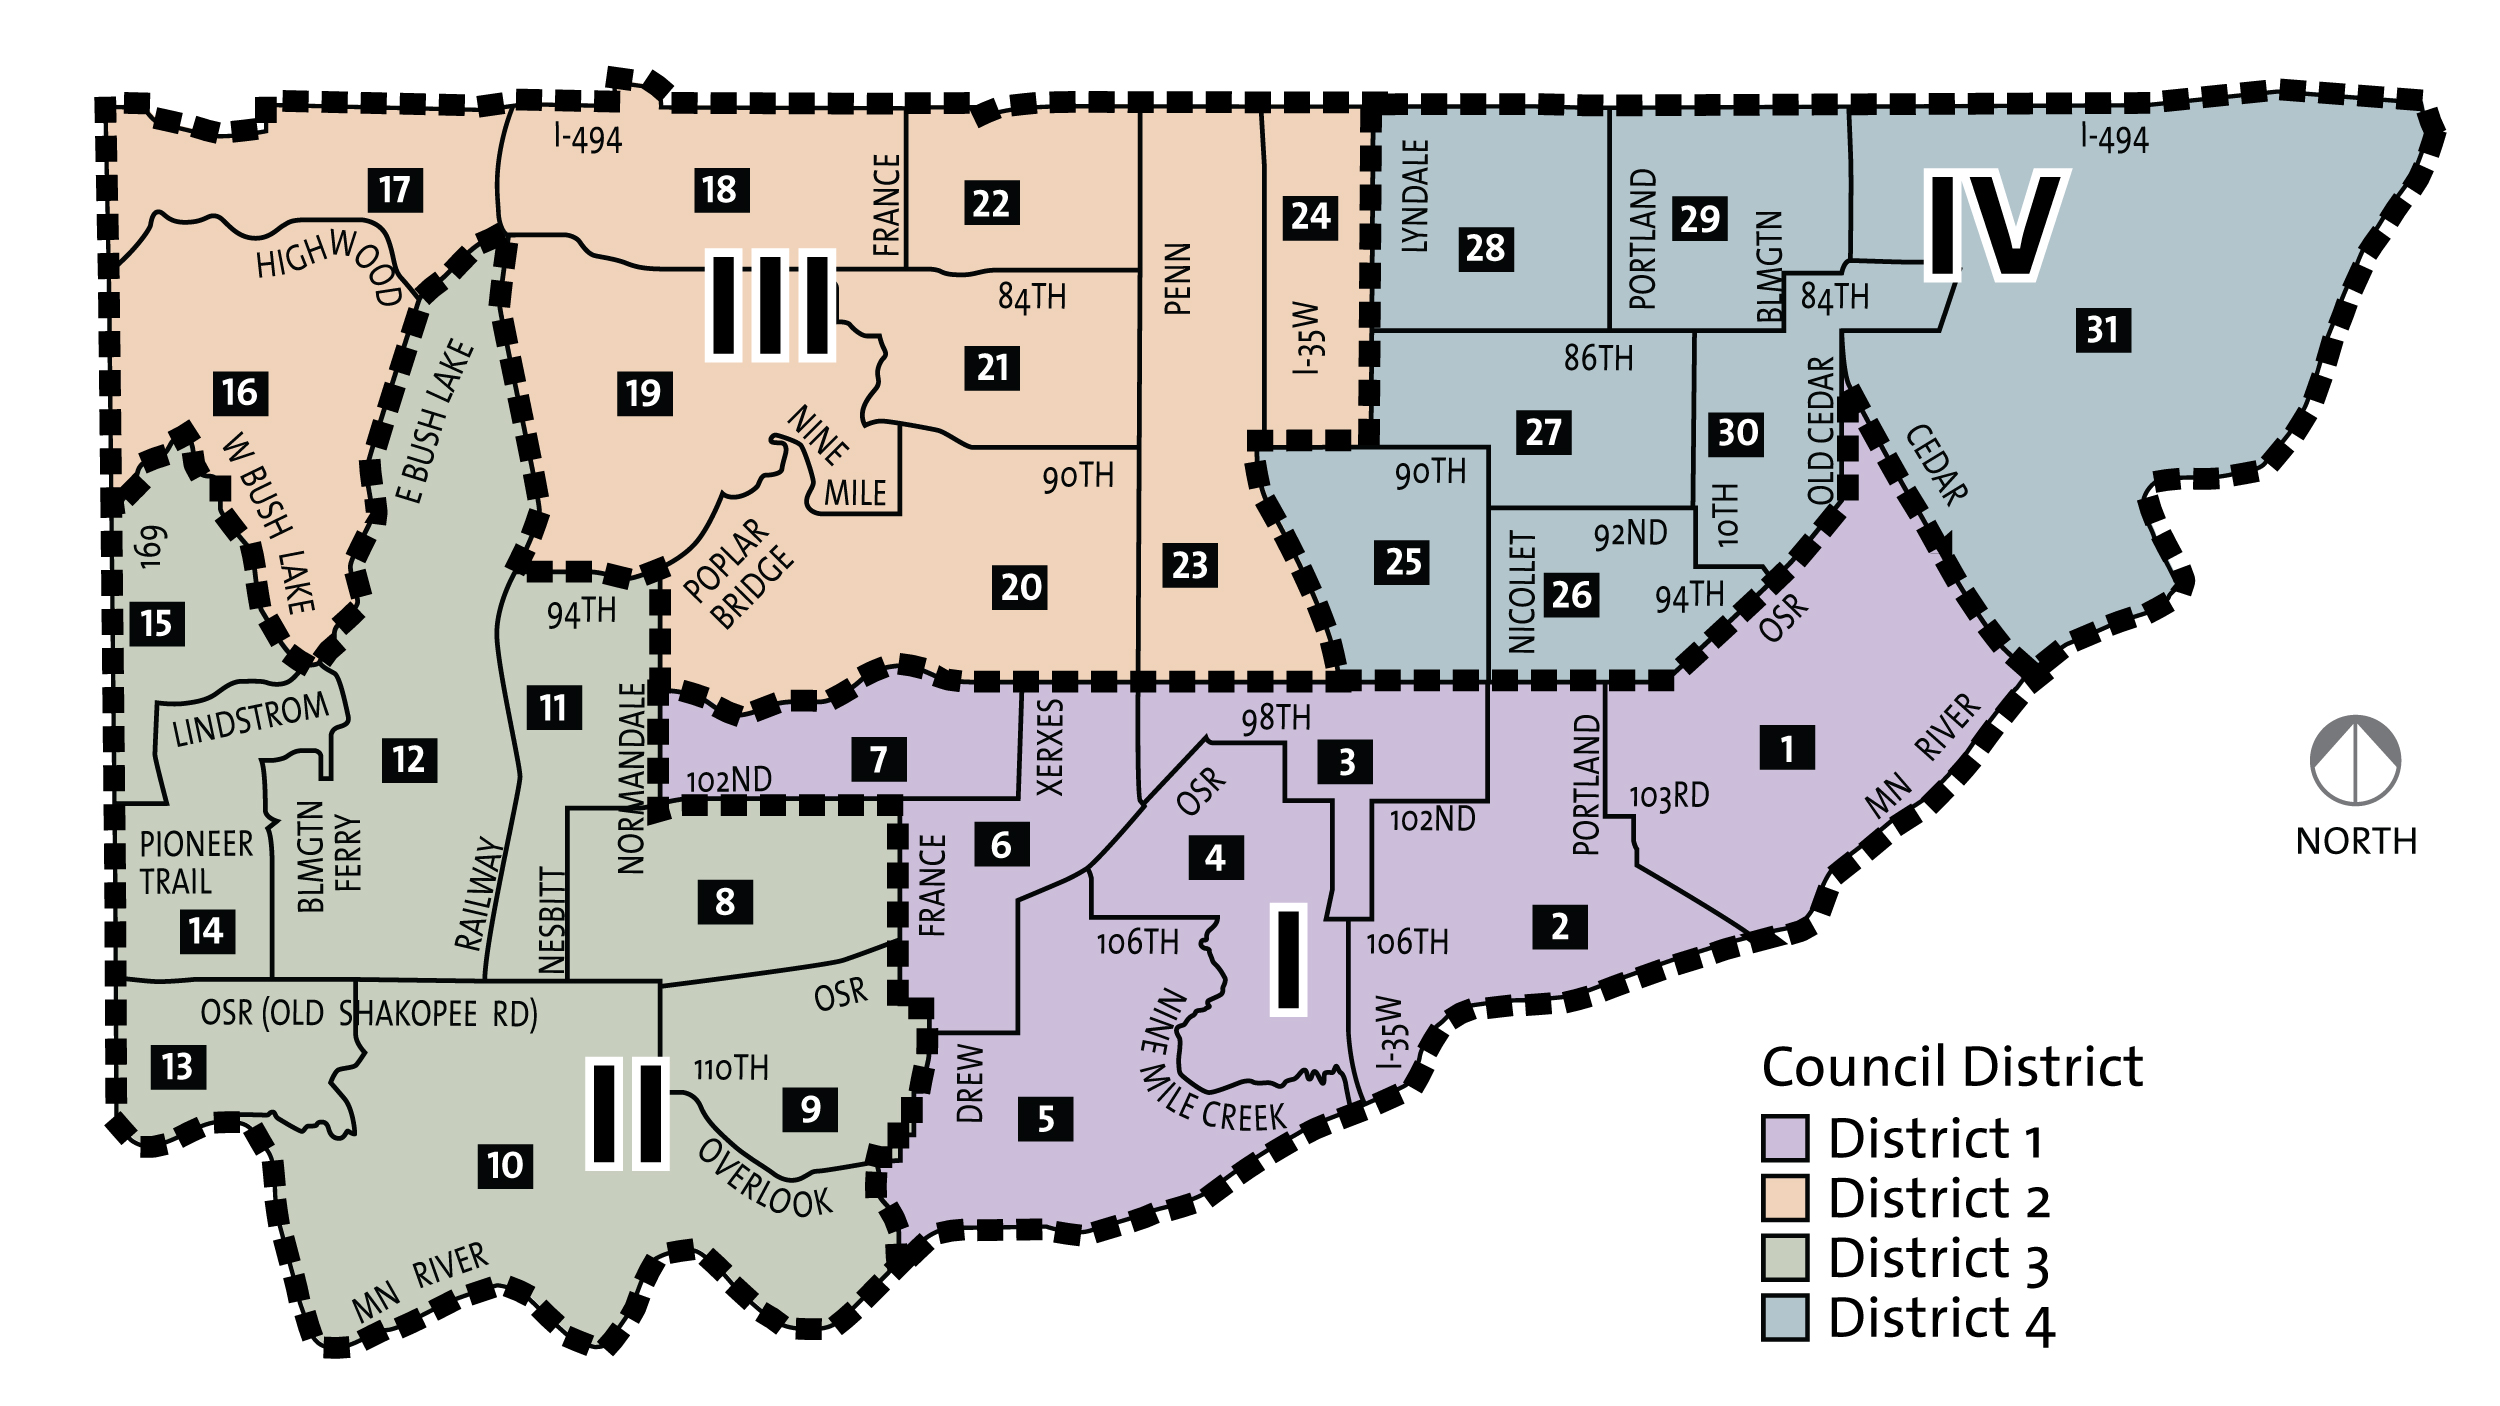 City Council districts